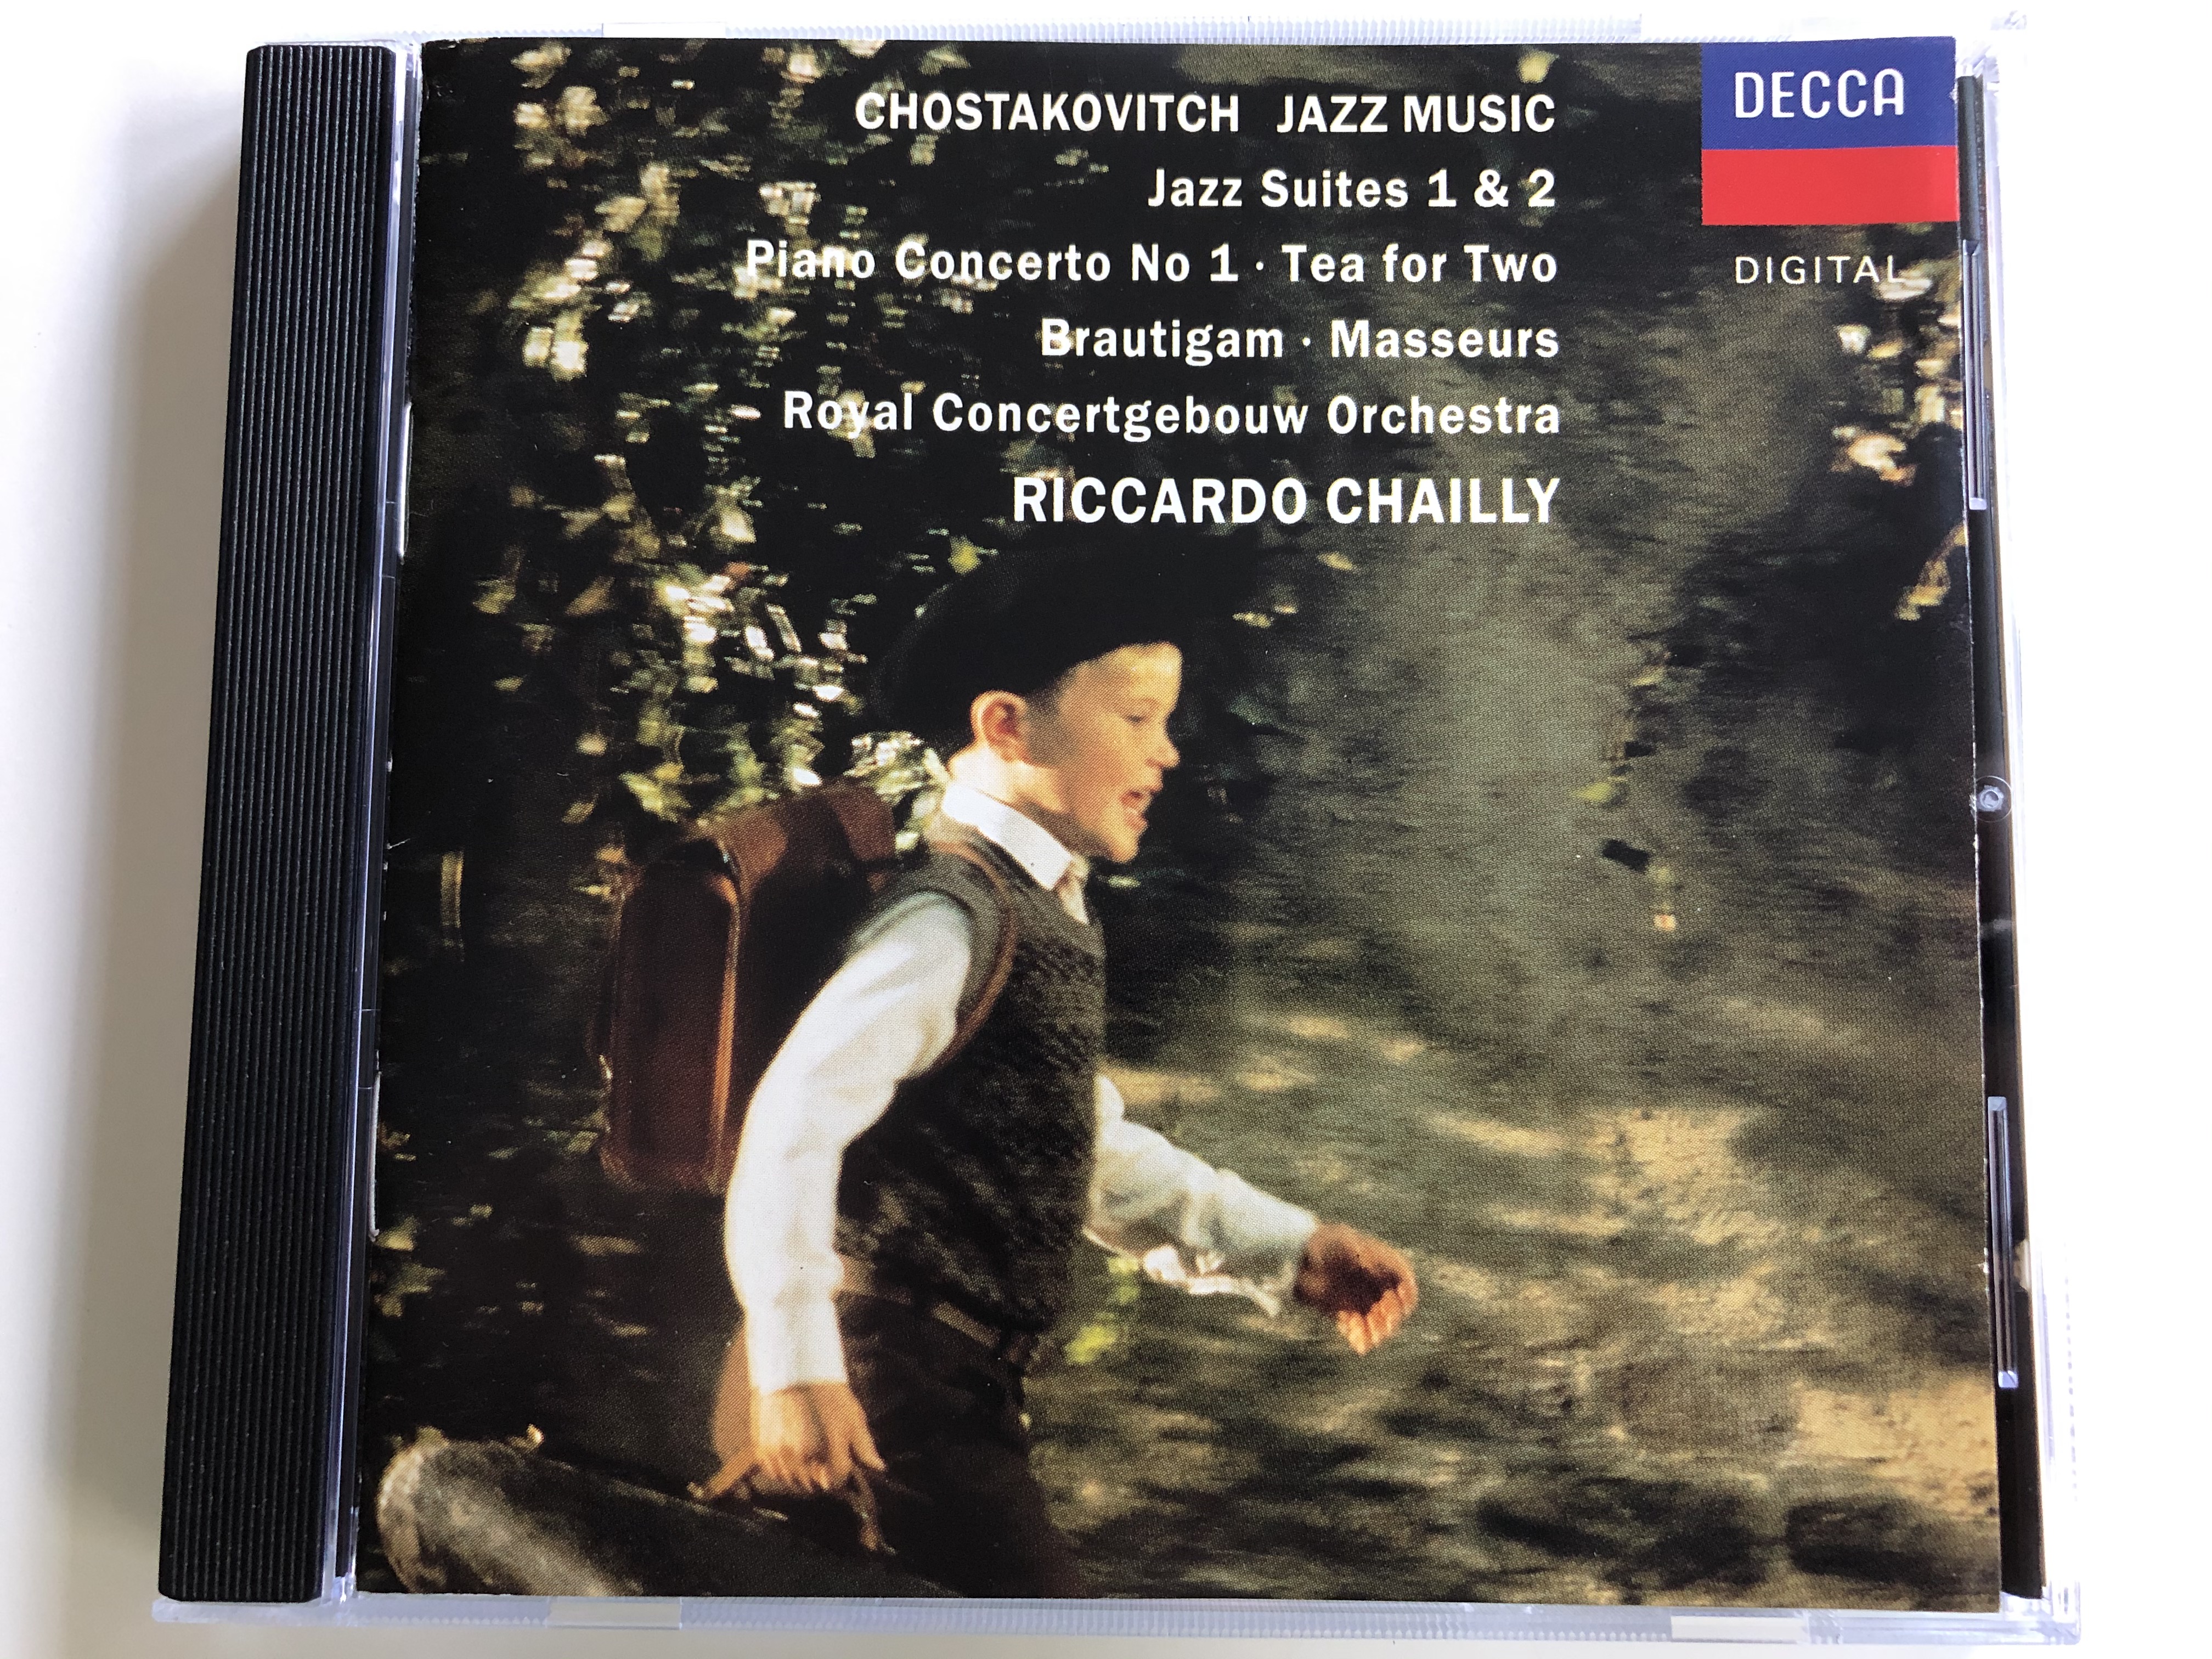 chostakovitch-jazz-music-jazz-suites-1-2-piano-concerto-no.-1-tea-for-two-brautigam-masseurs-royal-concertgebouw-orchestra-riccardo-chailly-decca-audio-cd-1993-stereo-433-702-2-1-.jpg